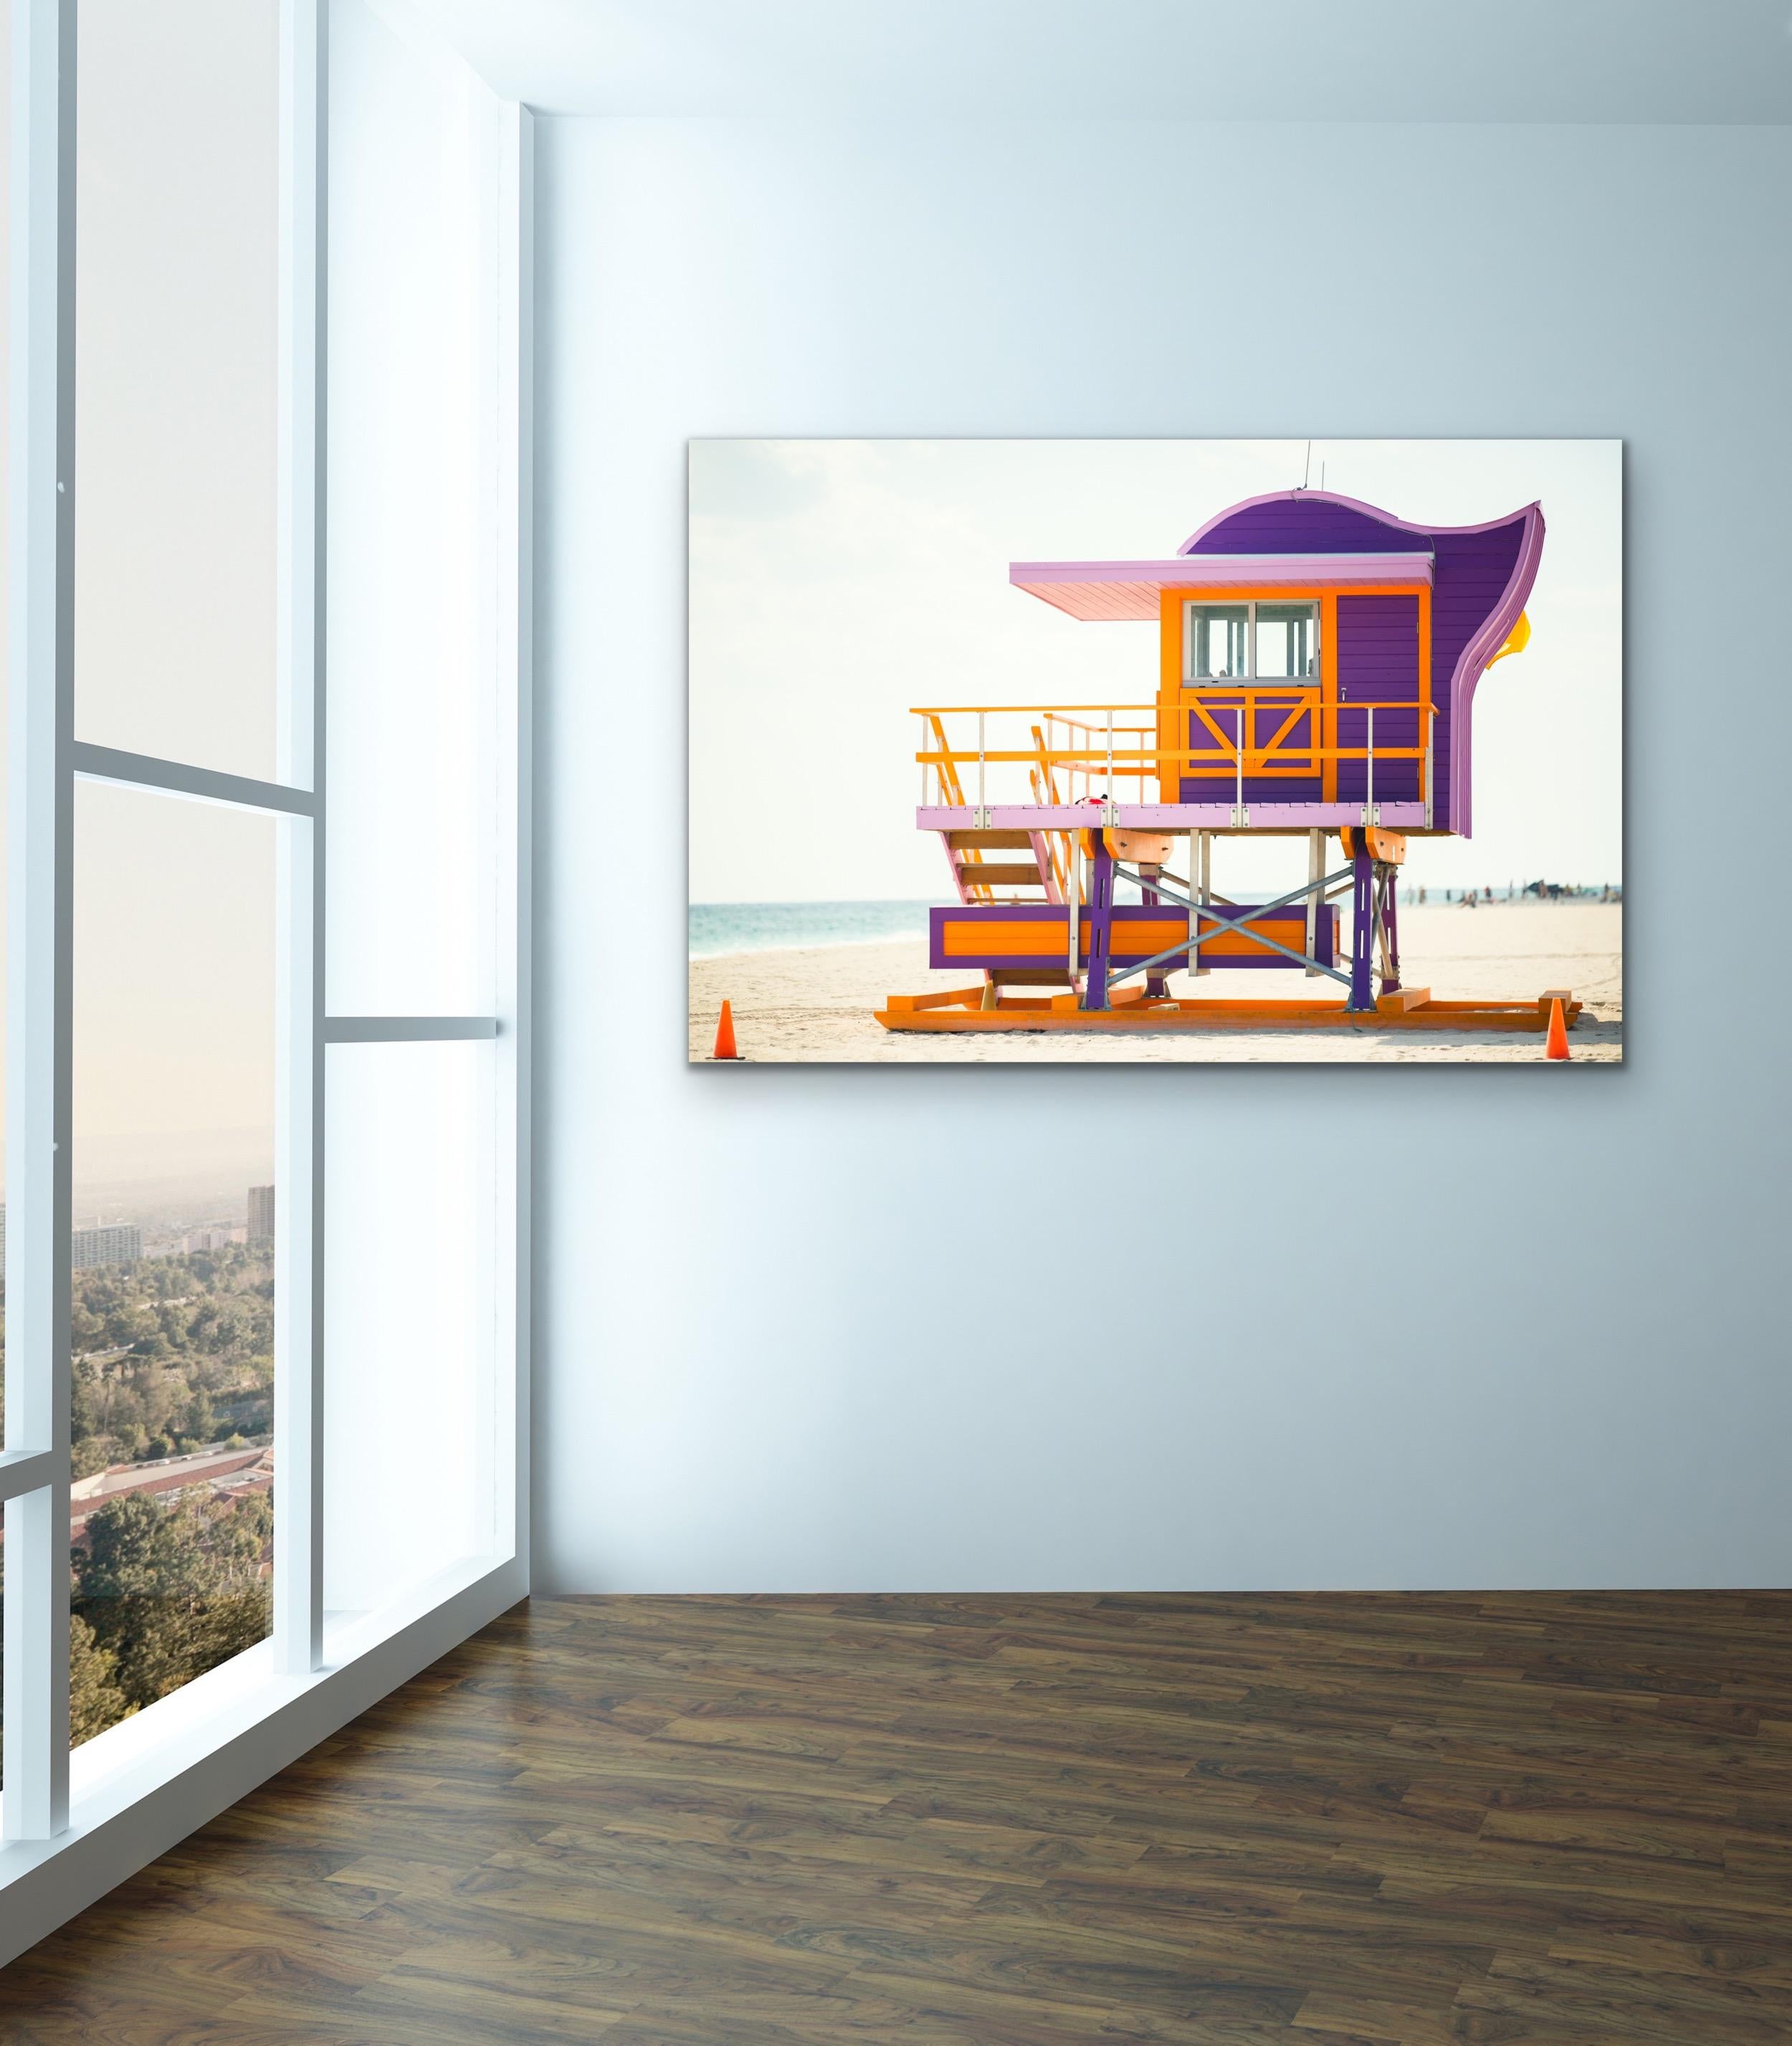 This contemporary coastal photograph by Peter Mendelson depicts a side view of a bright violet, pink, and orange Miami lifeguard stand on the beach. A light blue ocean can be seen behind the stand, with a light, neutral blue sky above it.